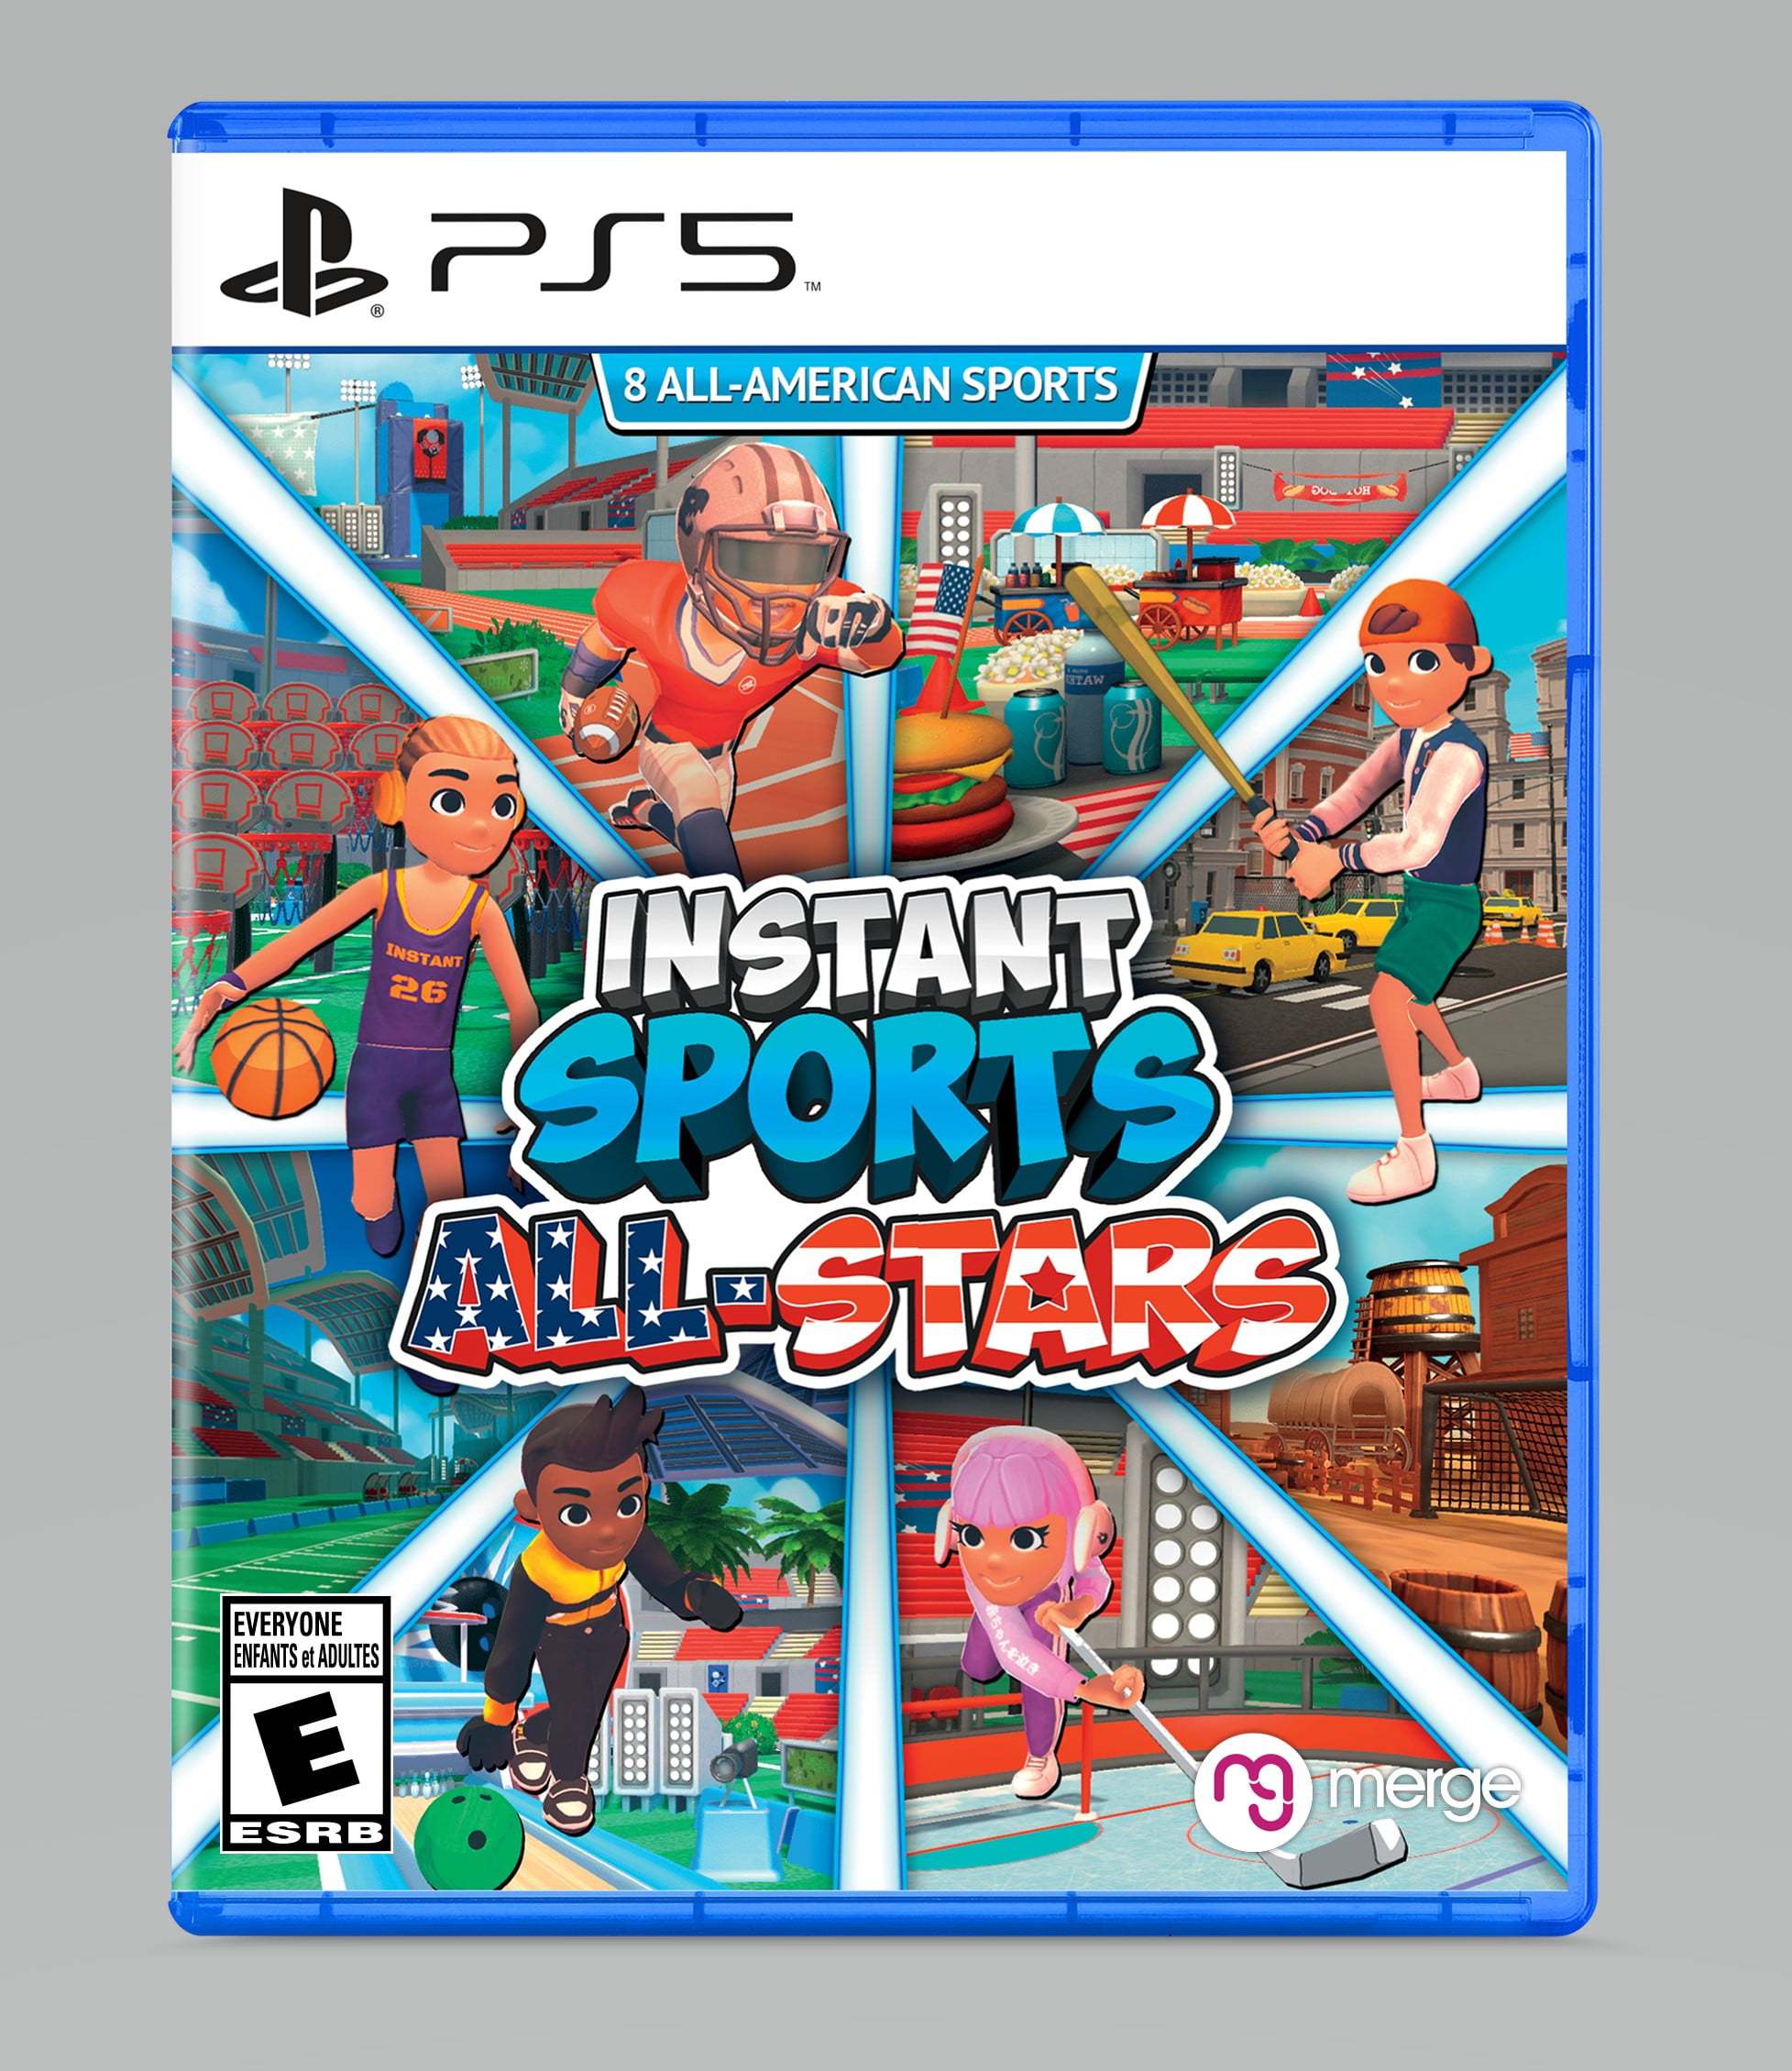 5, Sports Merge Instant Stars, 819335021310 PlayStation All Games,